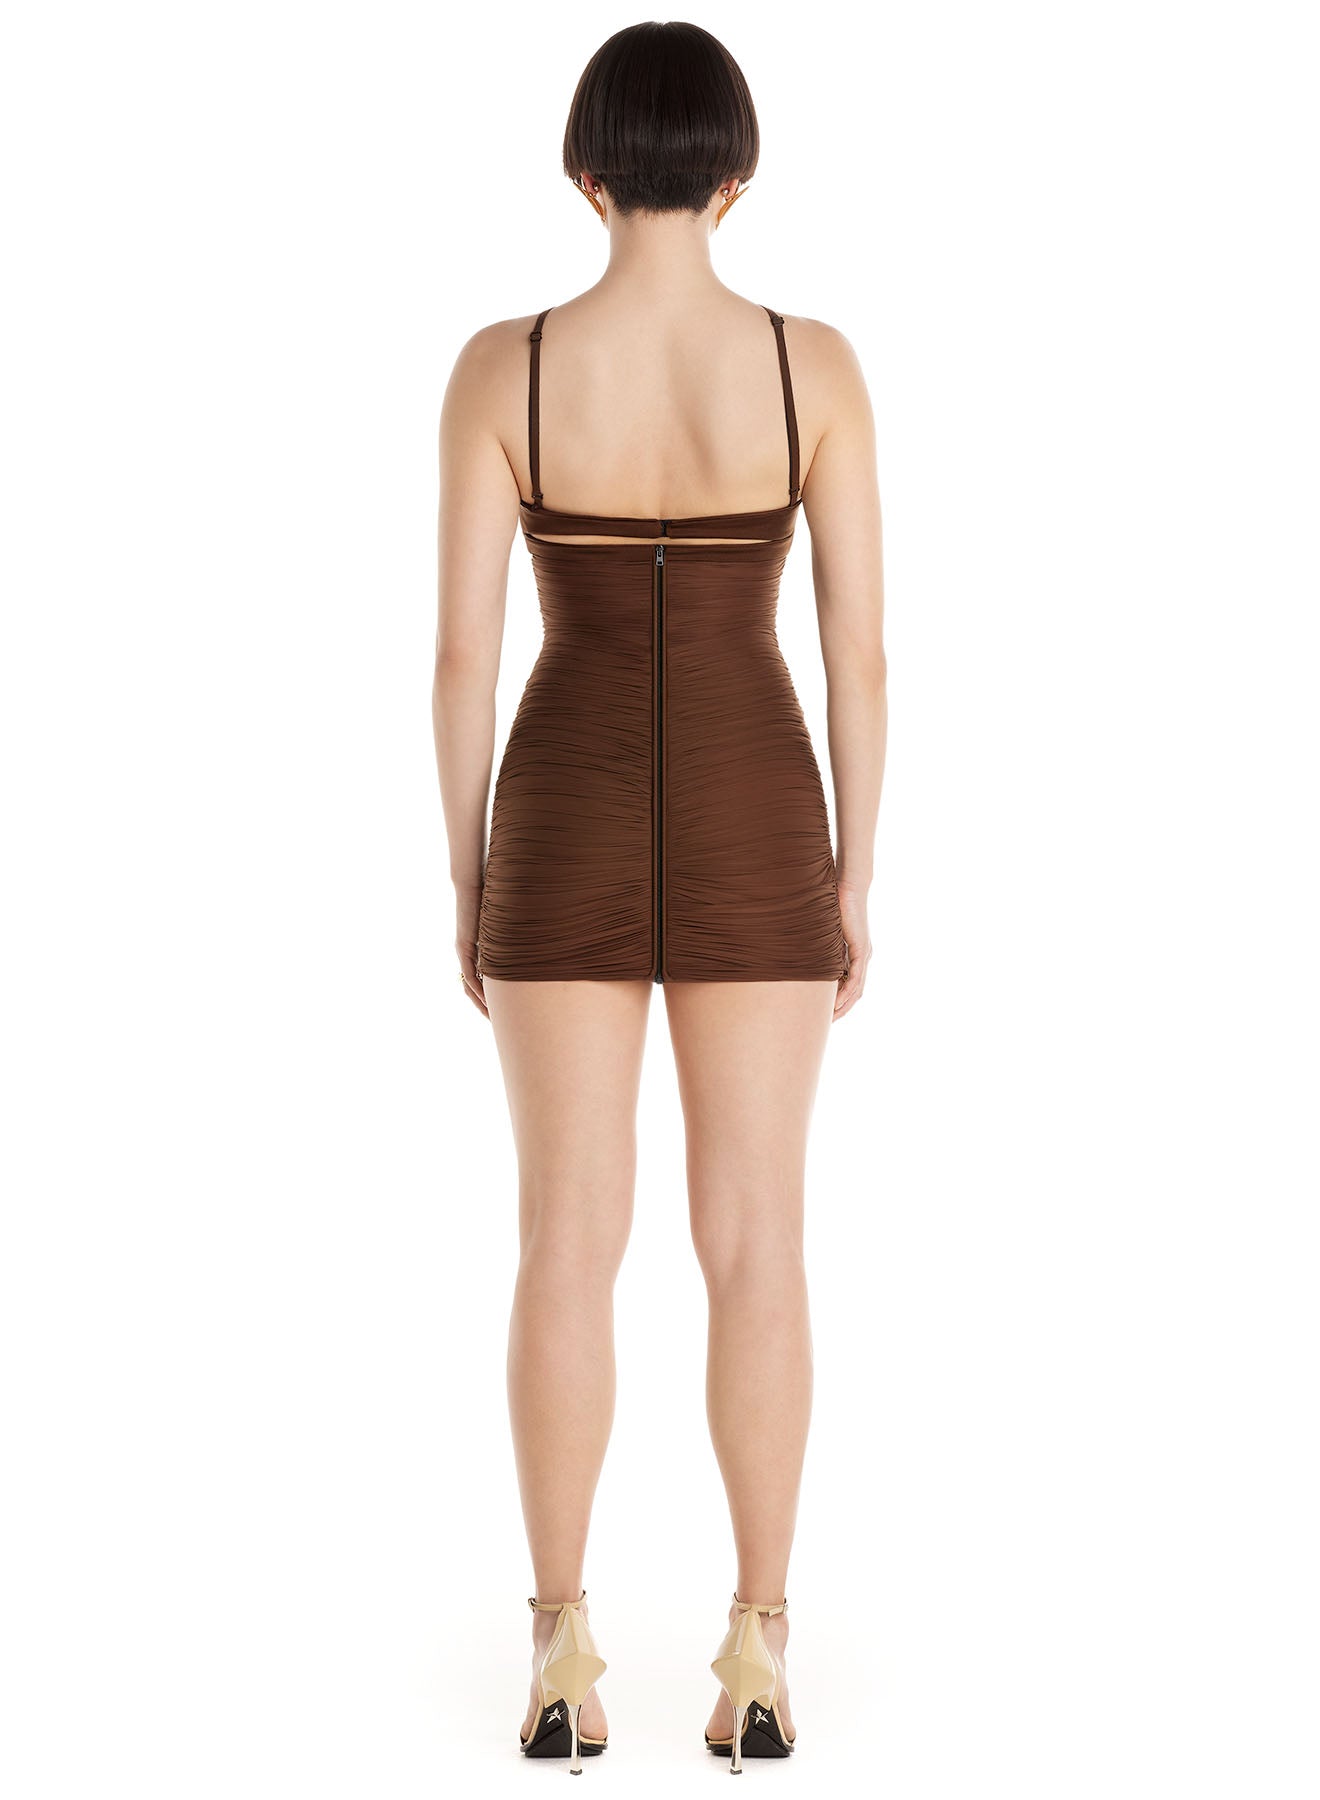 brown party dress